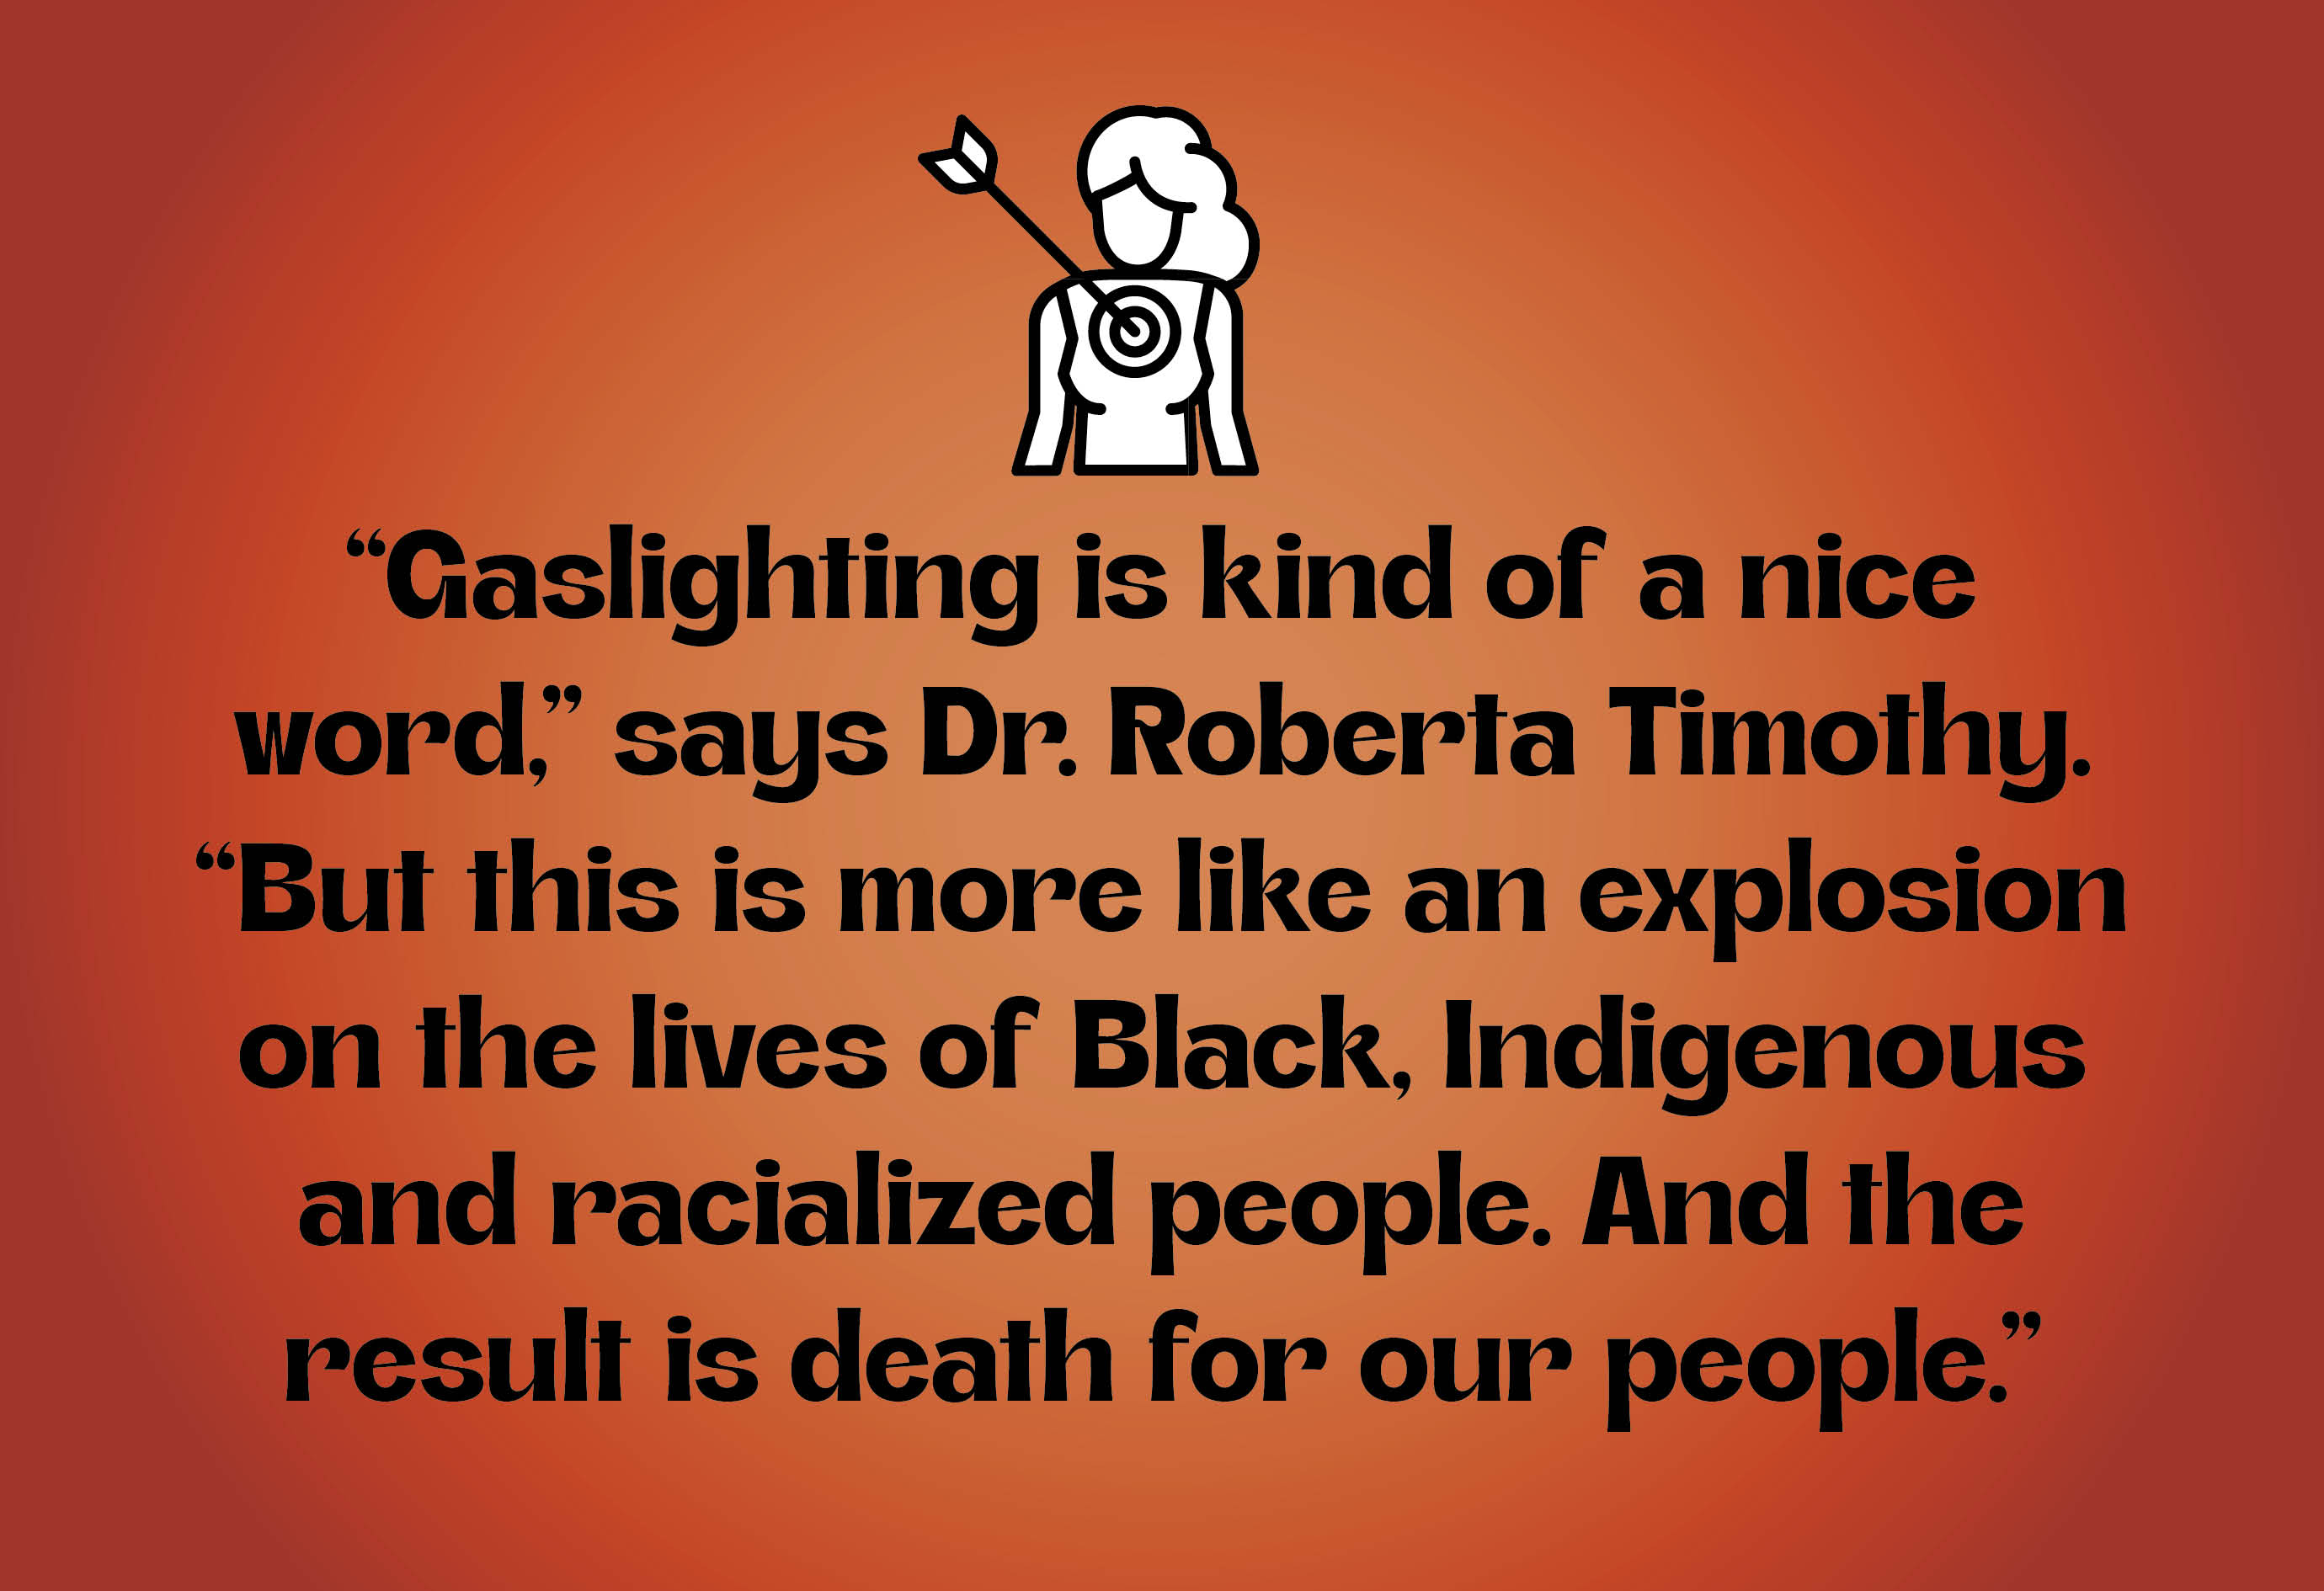 “Gaslighting is kind of a nice word,” says Dr. Roberta Timothy. “But this is more like an explosion on the lives of Black, Indigenous and racialized people. And the result is death for our people.”